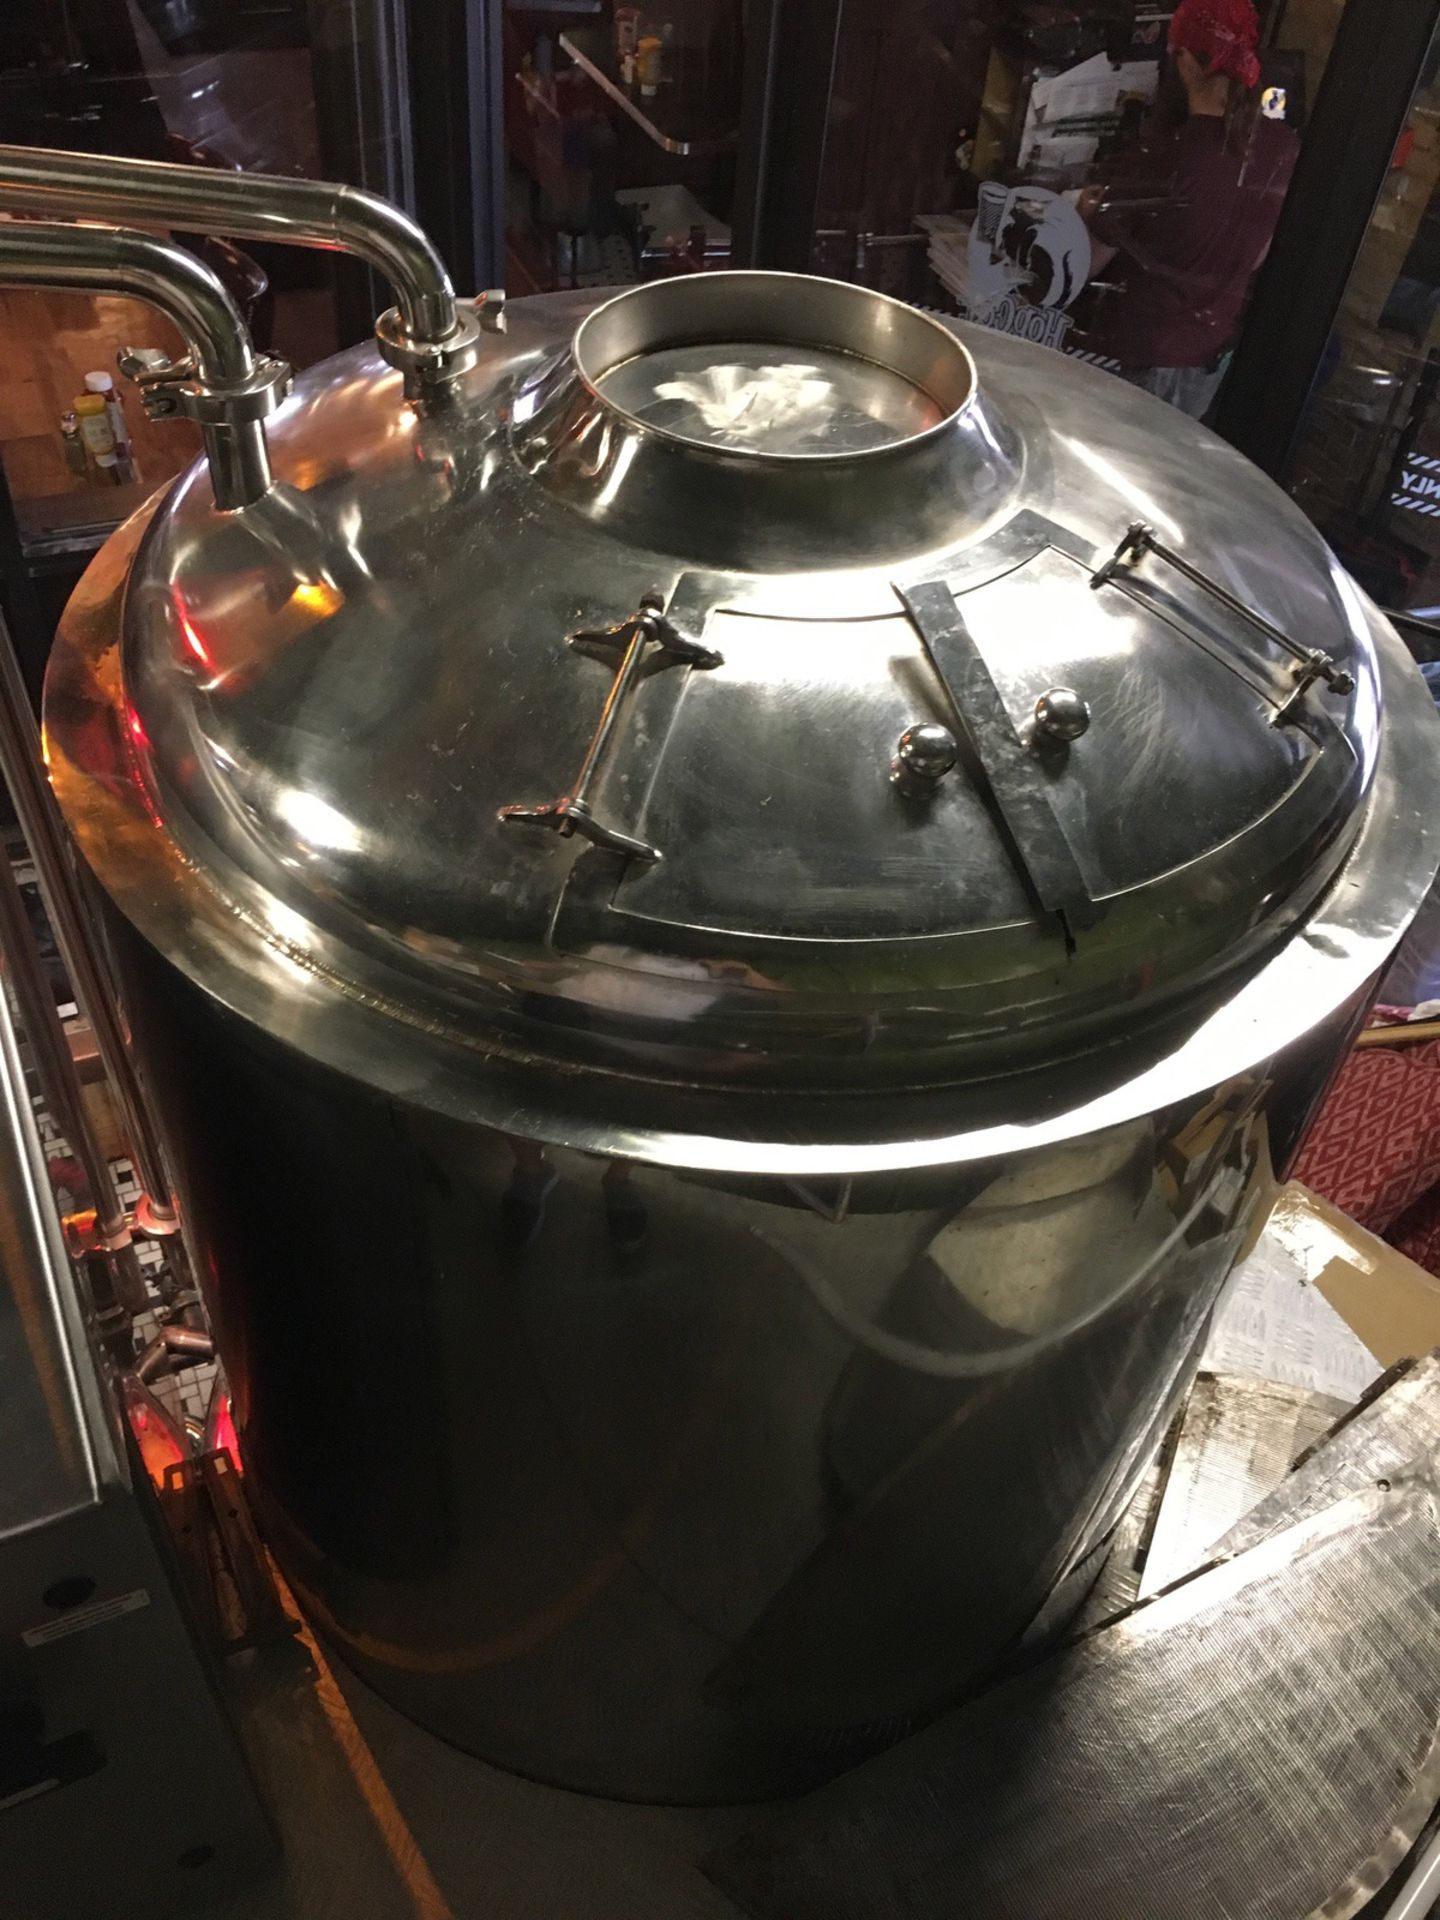 2007 Allied Beverage Tanks 3.5 BBL High Polish Brewhouse Package | Subject to Bulk | Rig Fee: $3750 - Image 26 of 32